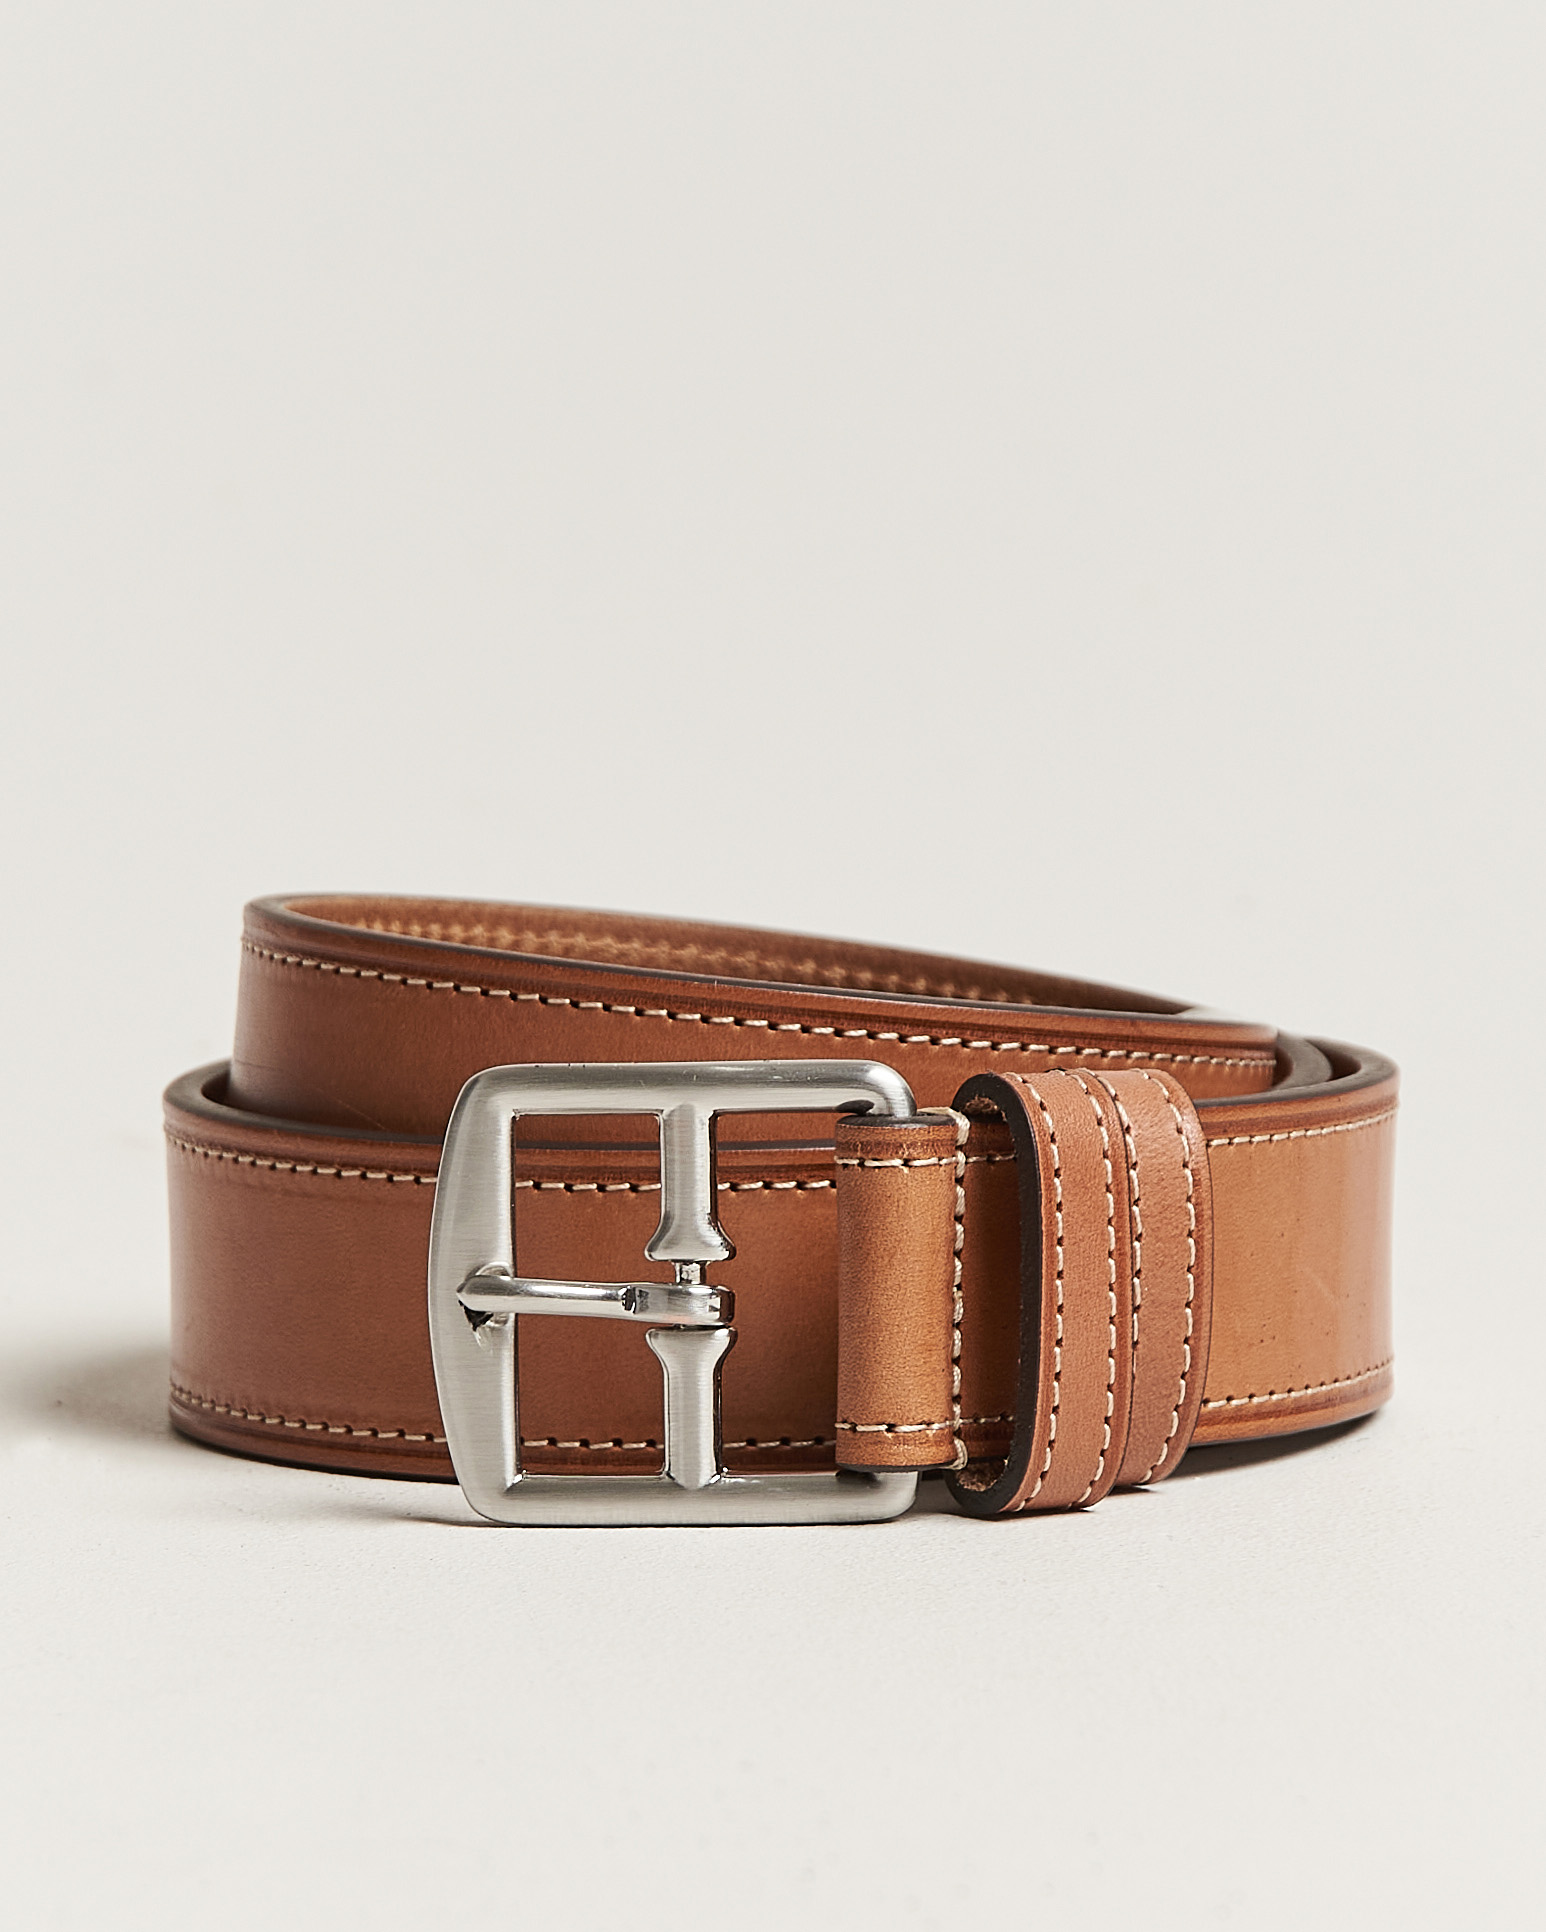 Anderson's Bridle Stiched 3,5 cm Leather Belt Tan at CareOfCarl.com